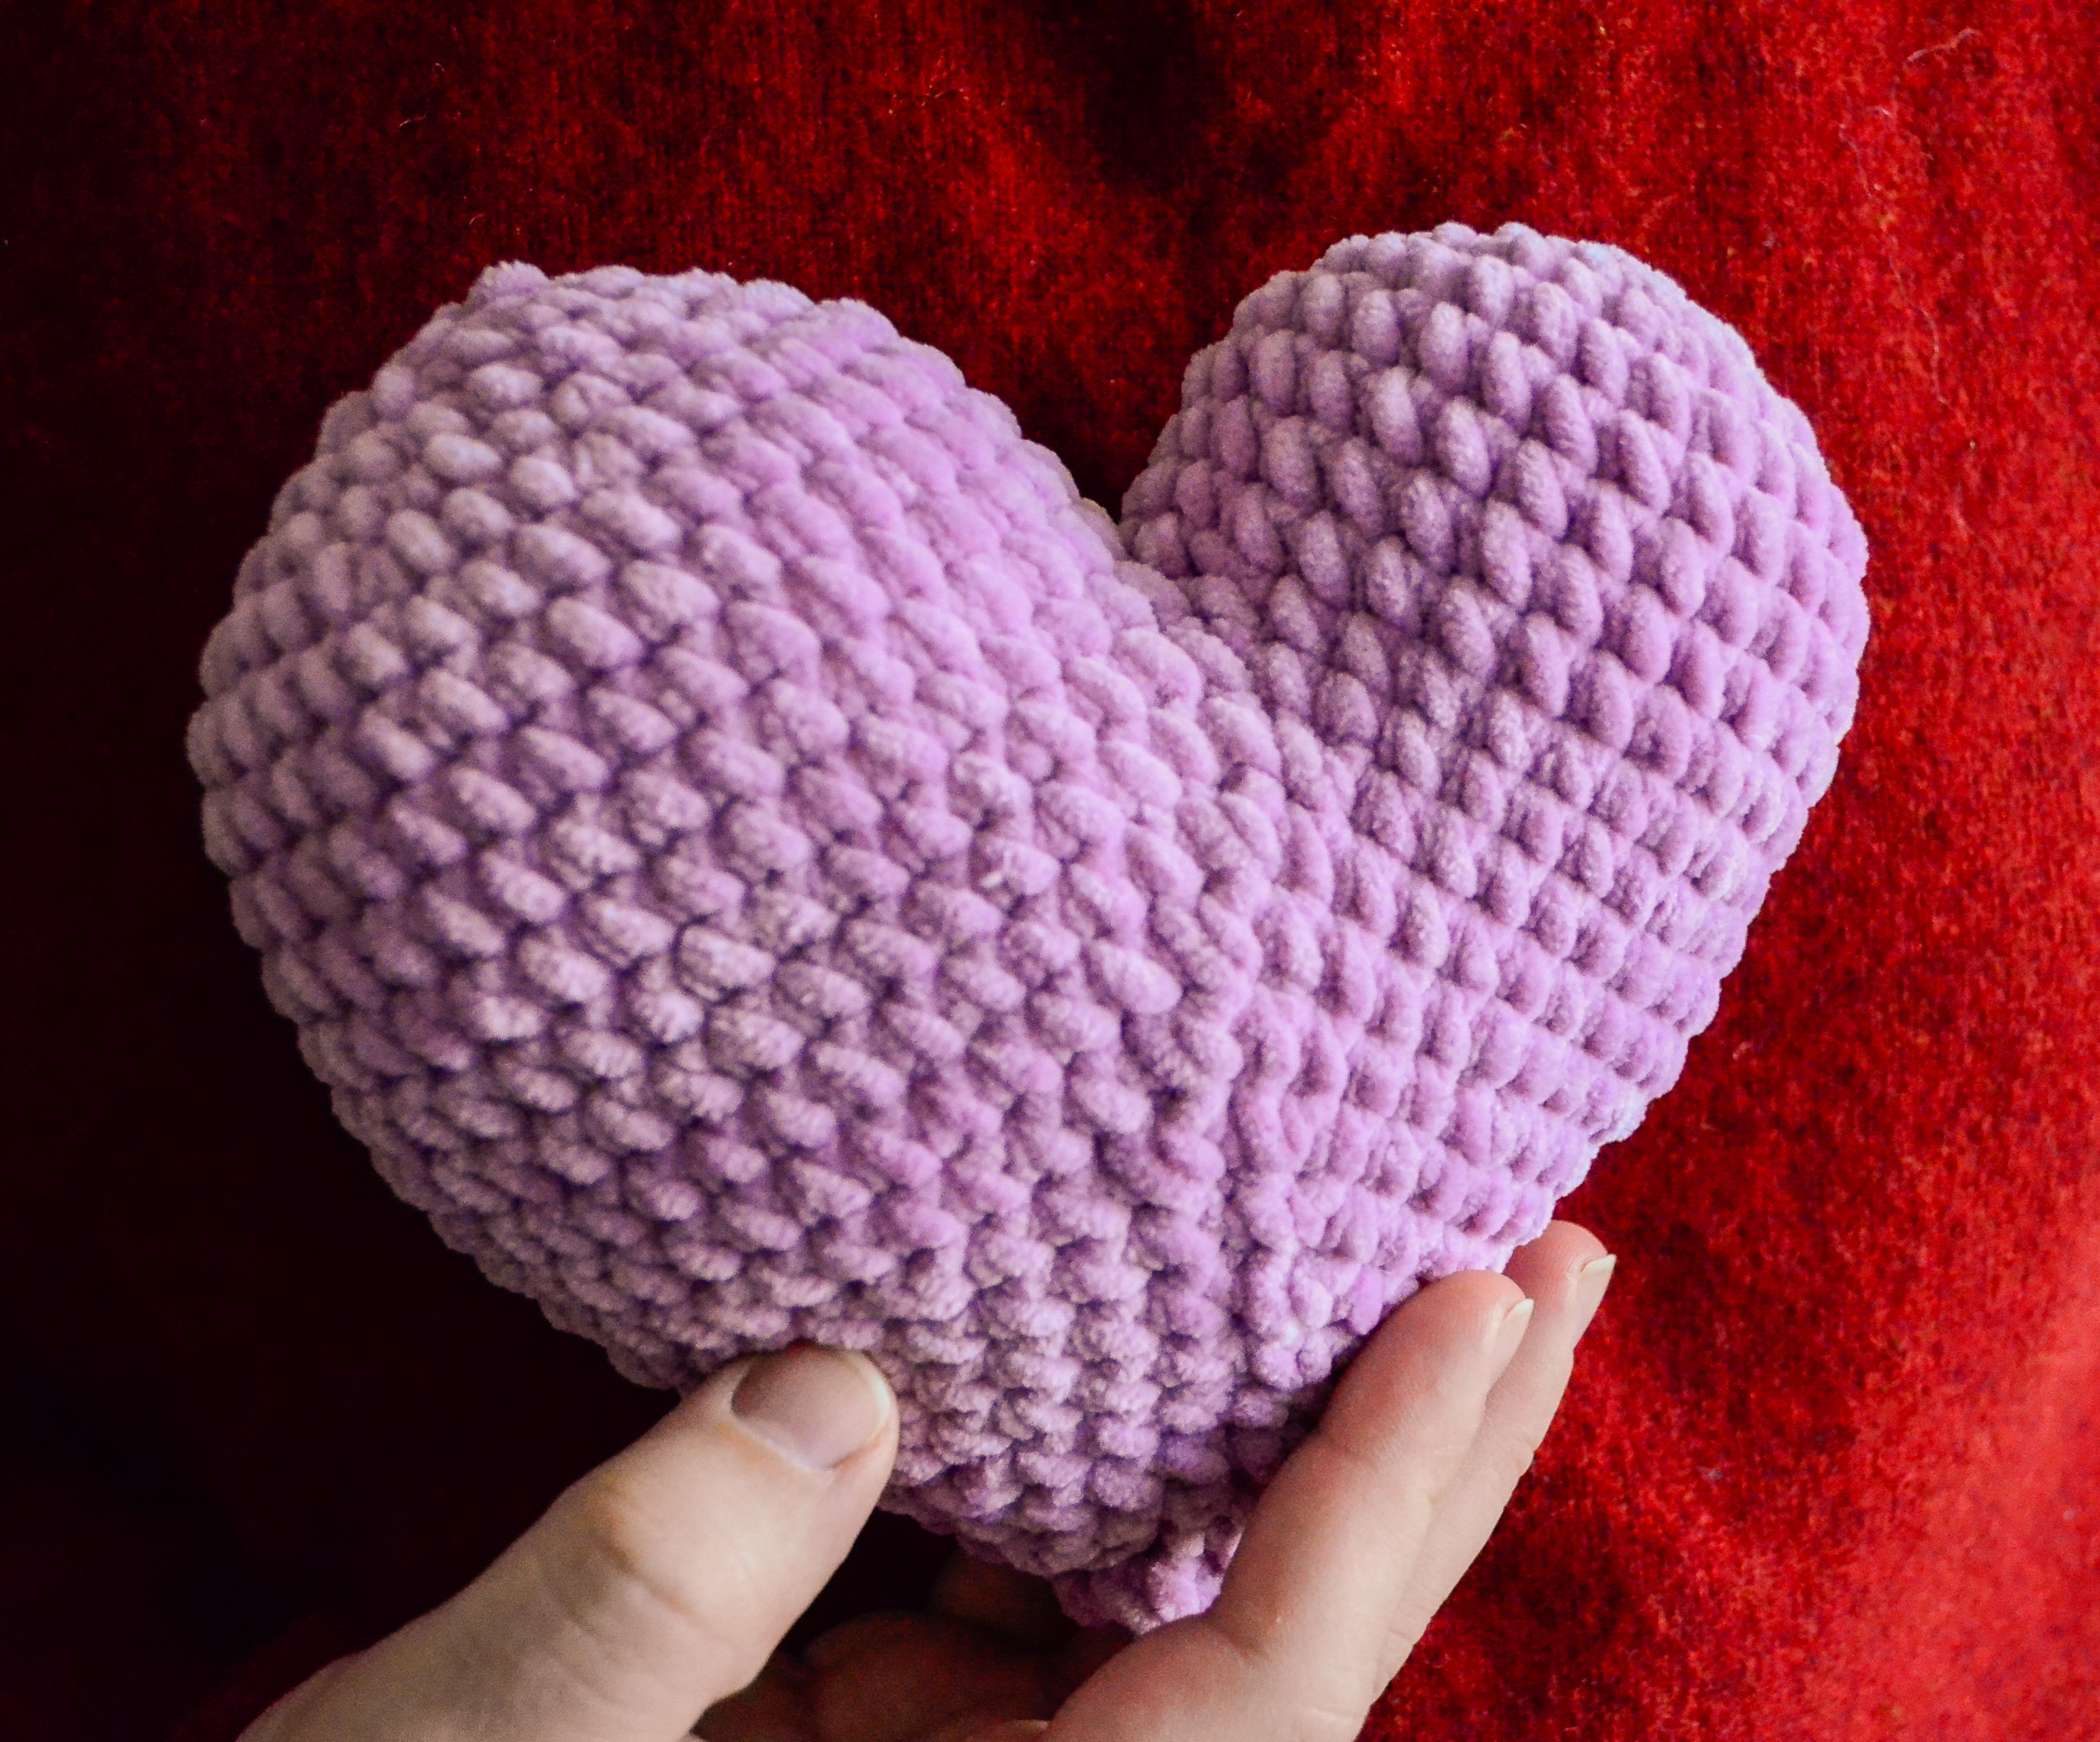 Free amigurumi heart pattern - Patchy heart sample held in a hand